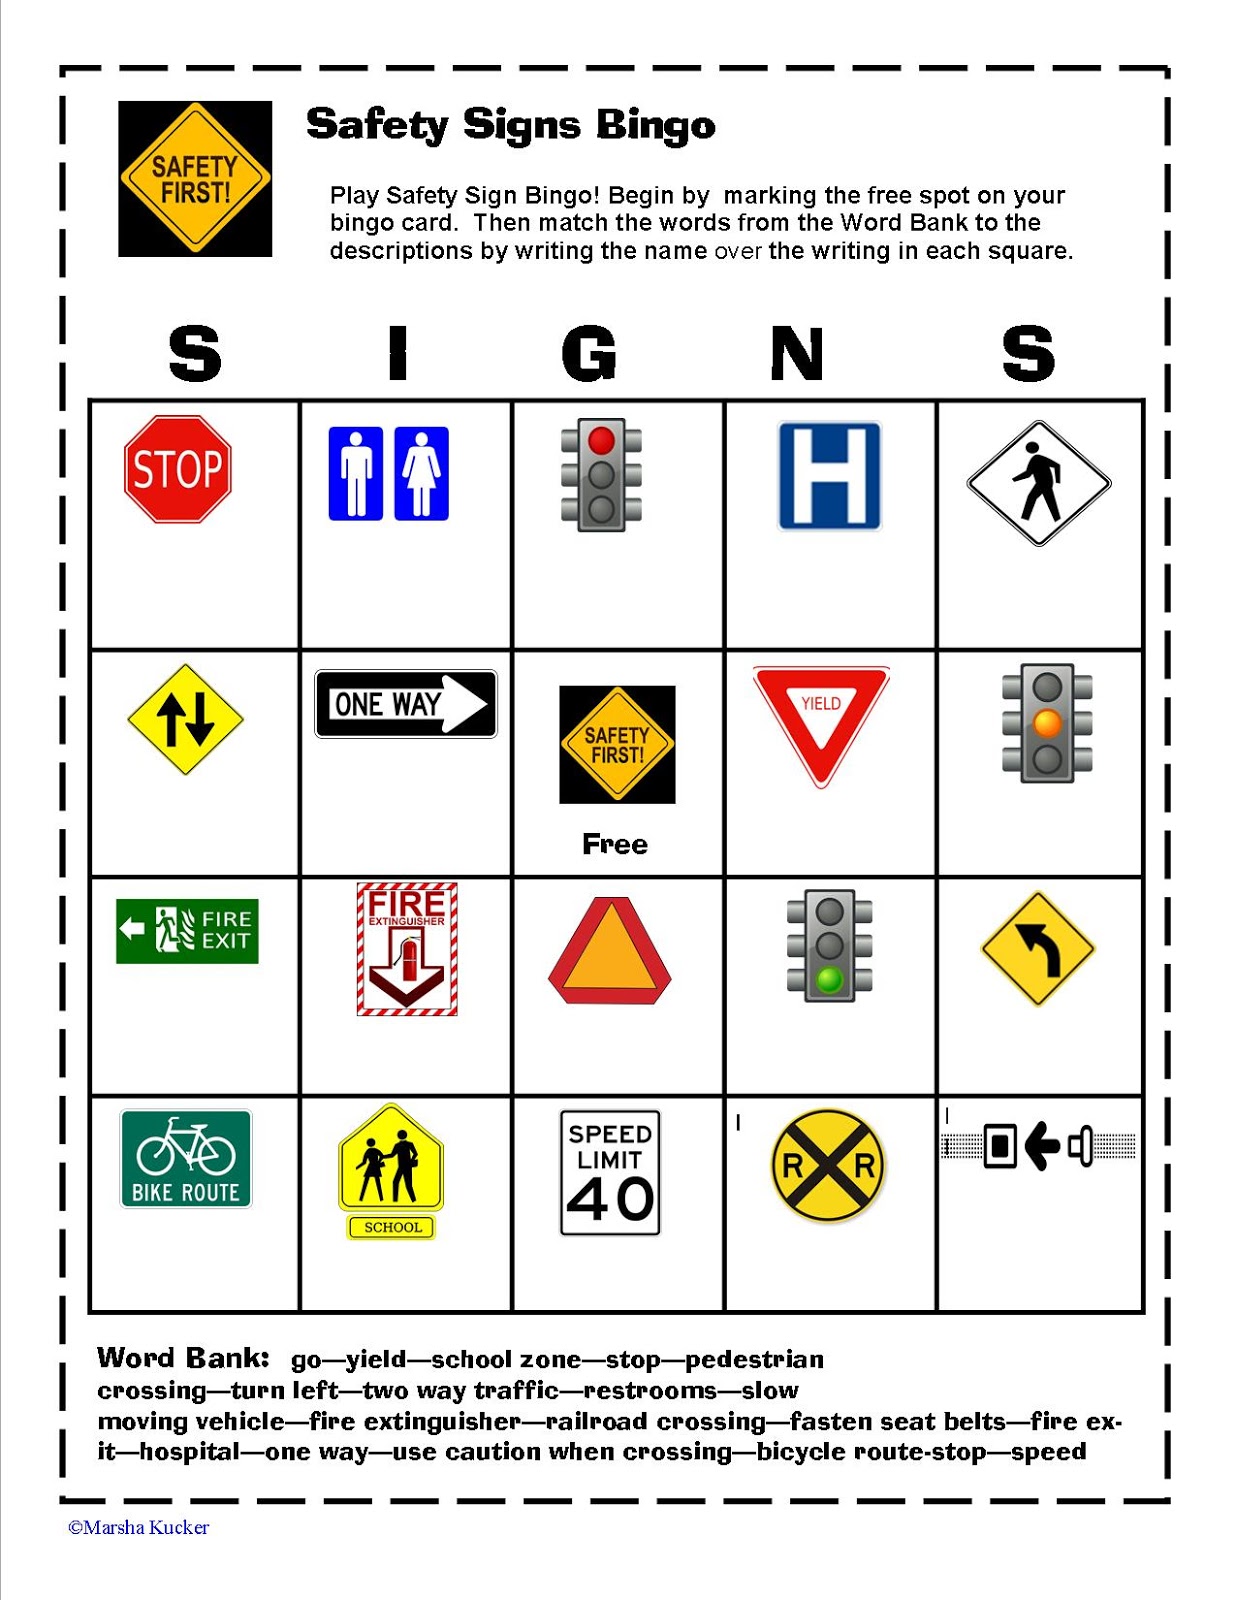 kidz-learning-connection-safety-signs-bingo